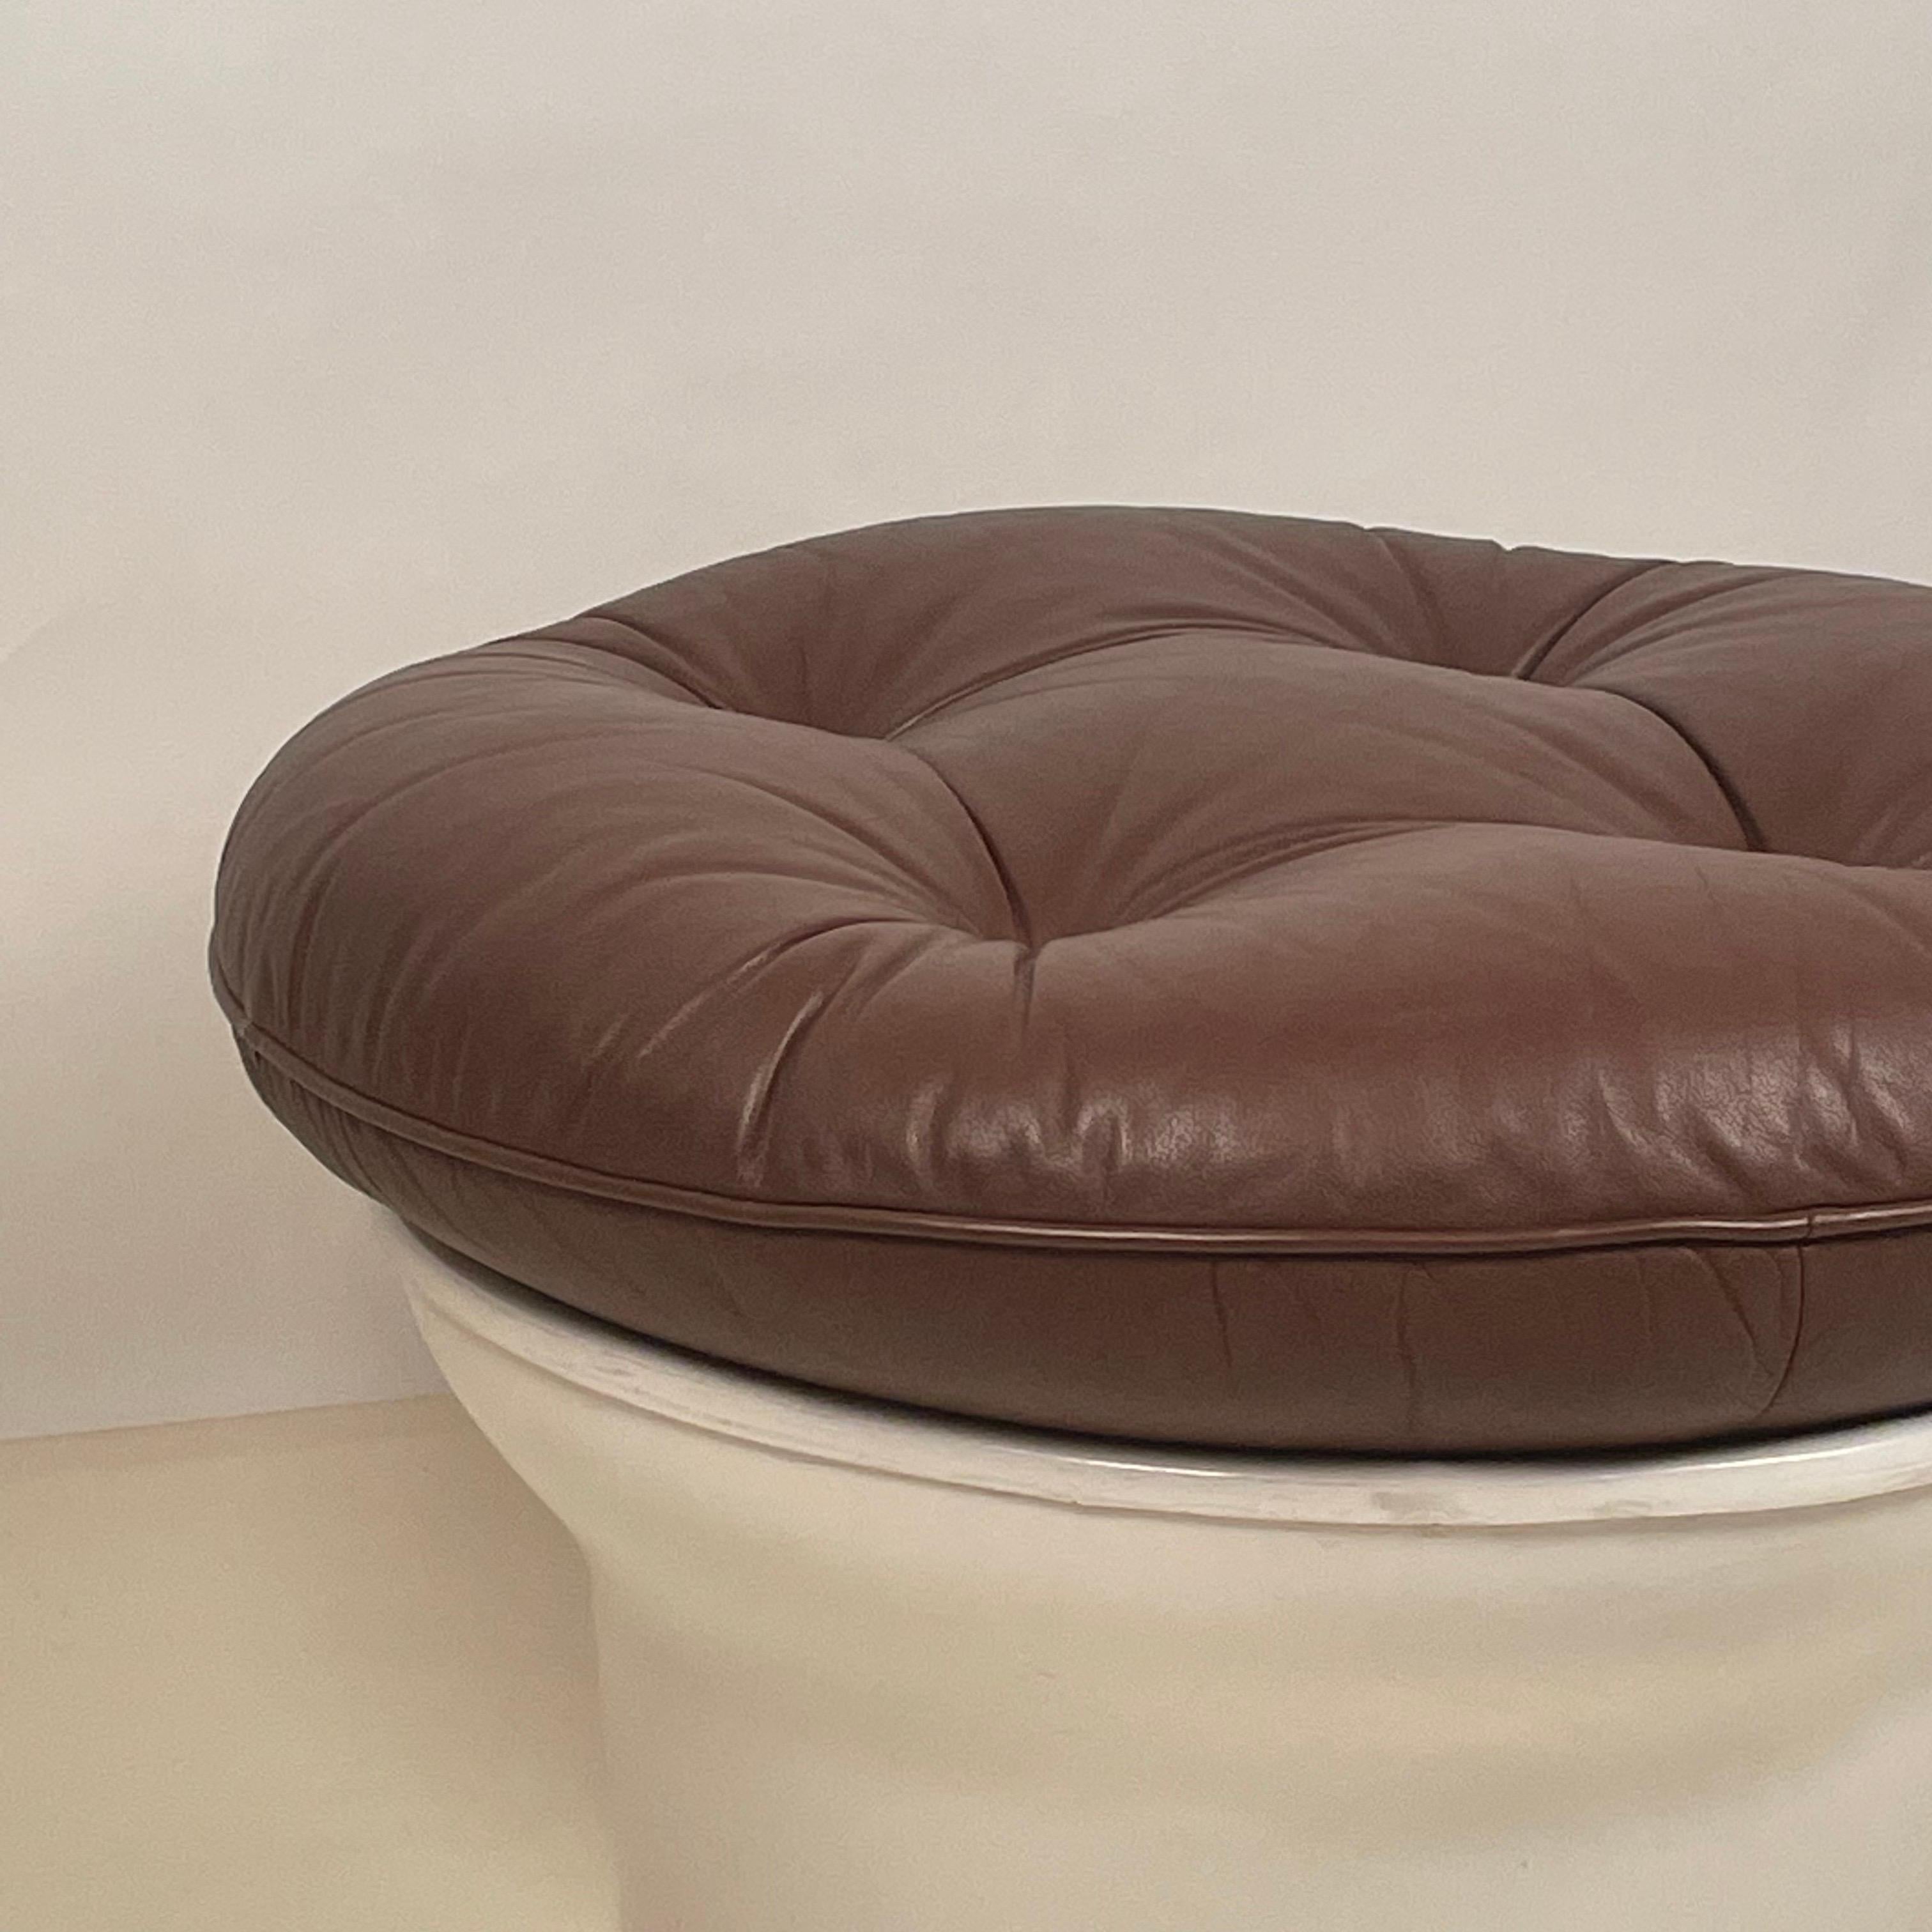 Rare 'Karate' fiberglass shell ottoman by Michel Cadestin. This iconic ottoman was designed circa 1970 by Michel Cadestin for French furniture manufacturer Airborne. We also have the pair of matching swiveling armchairs listed: please search for